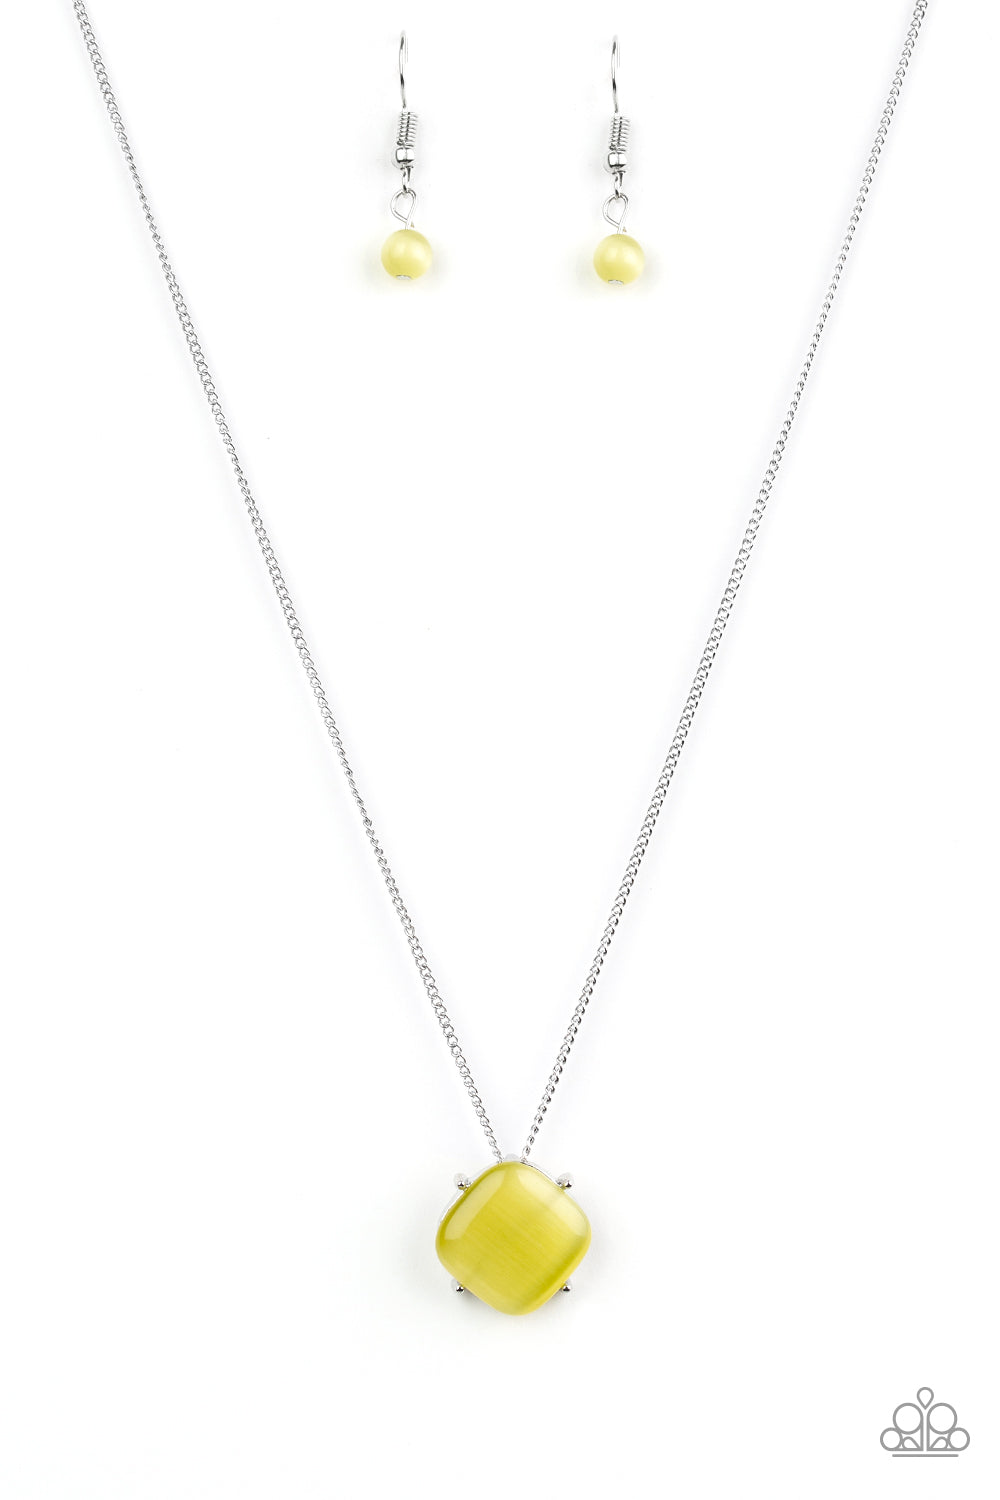 You GLOW Girl - Yellow Necklace